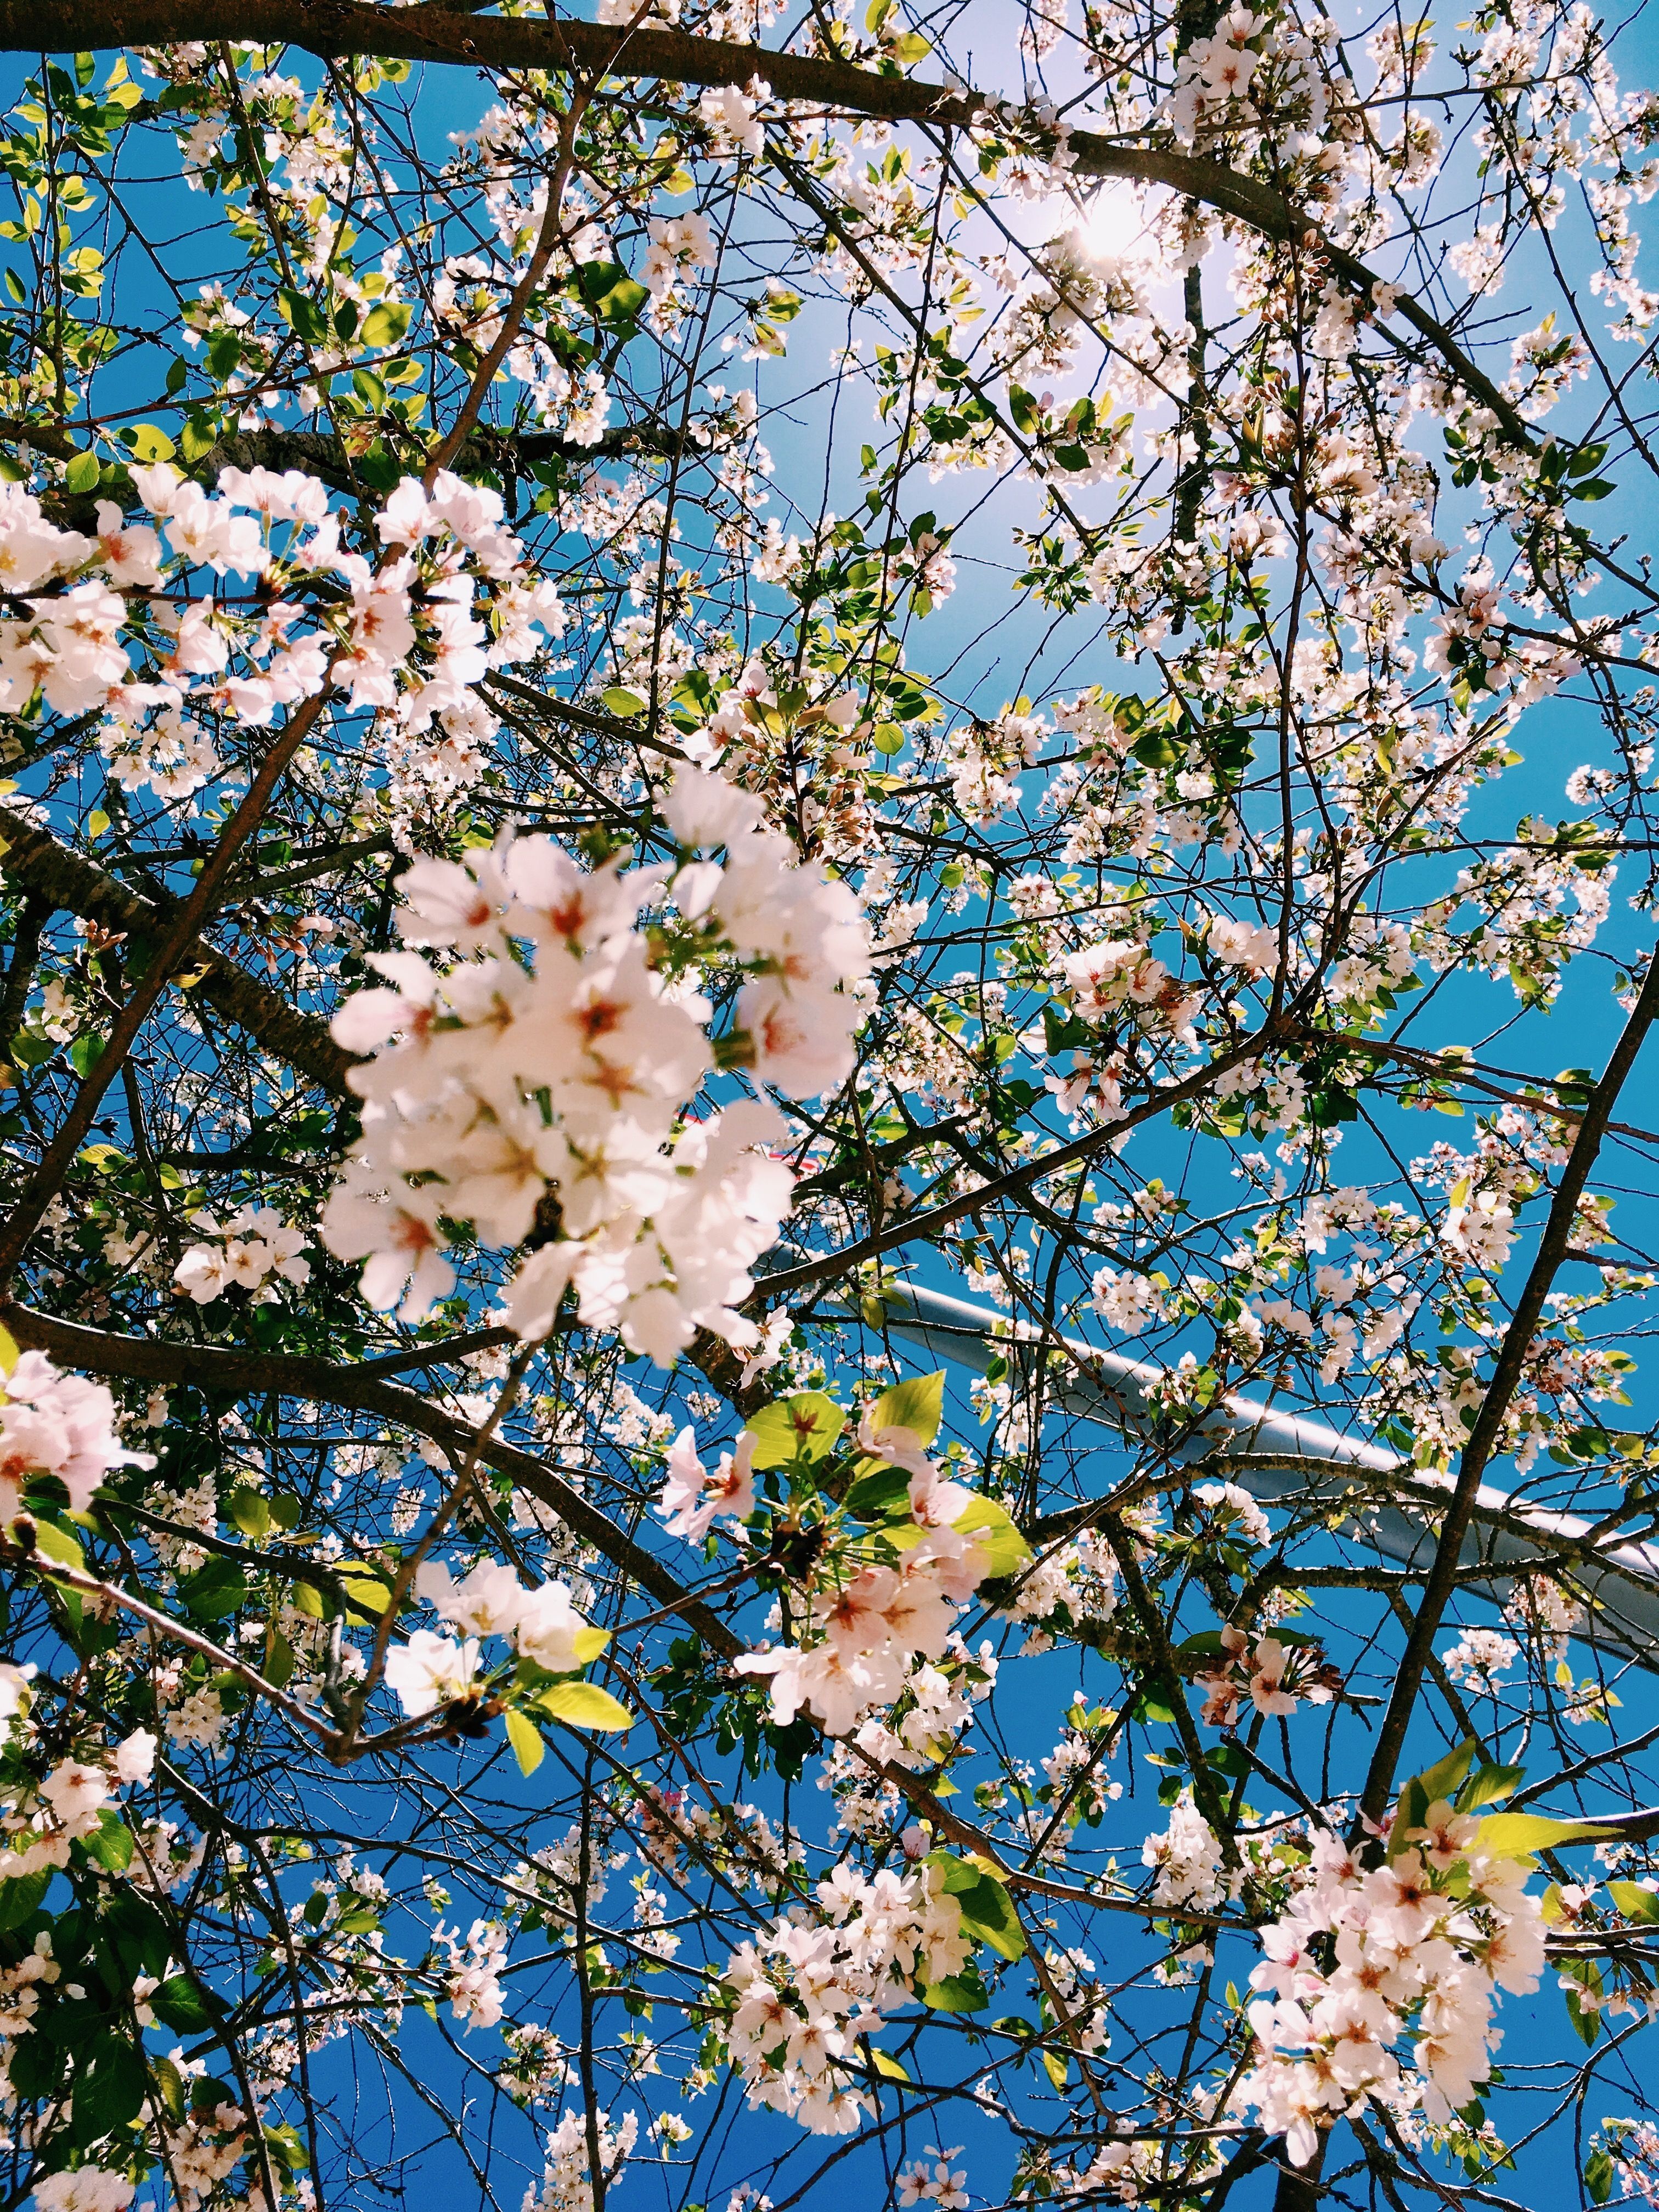 Aesthetic Spring Flowers Wallpapers | HD Background Images | Photos ...